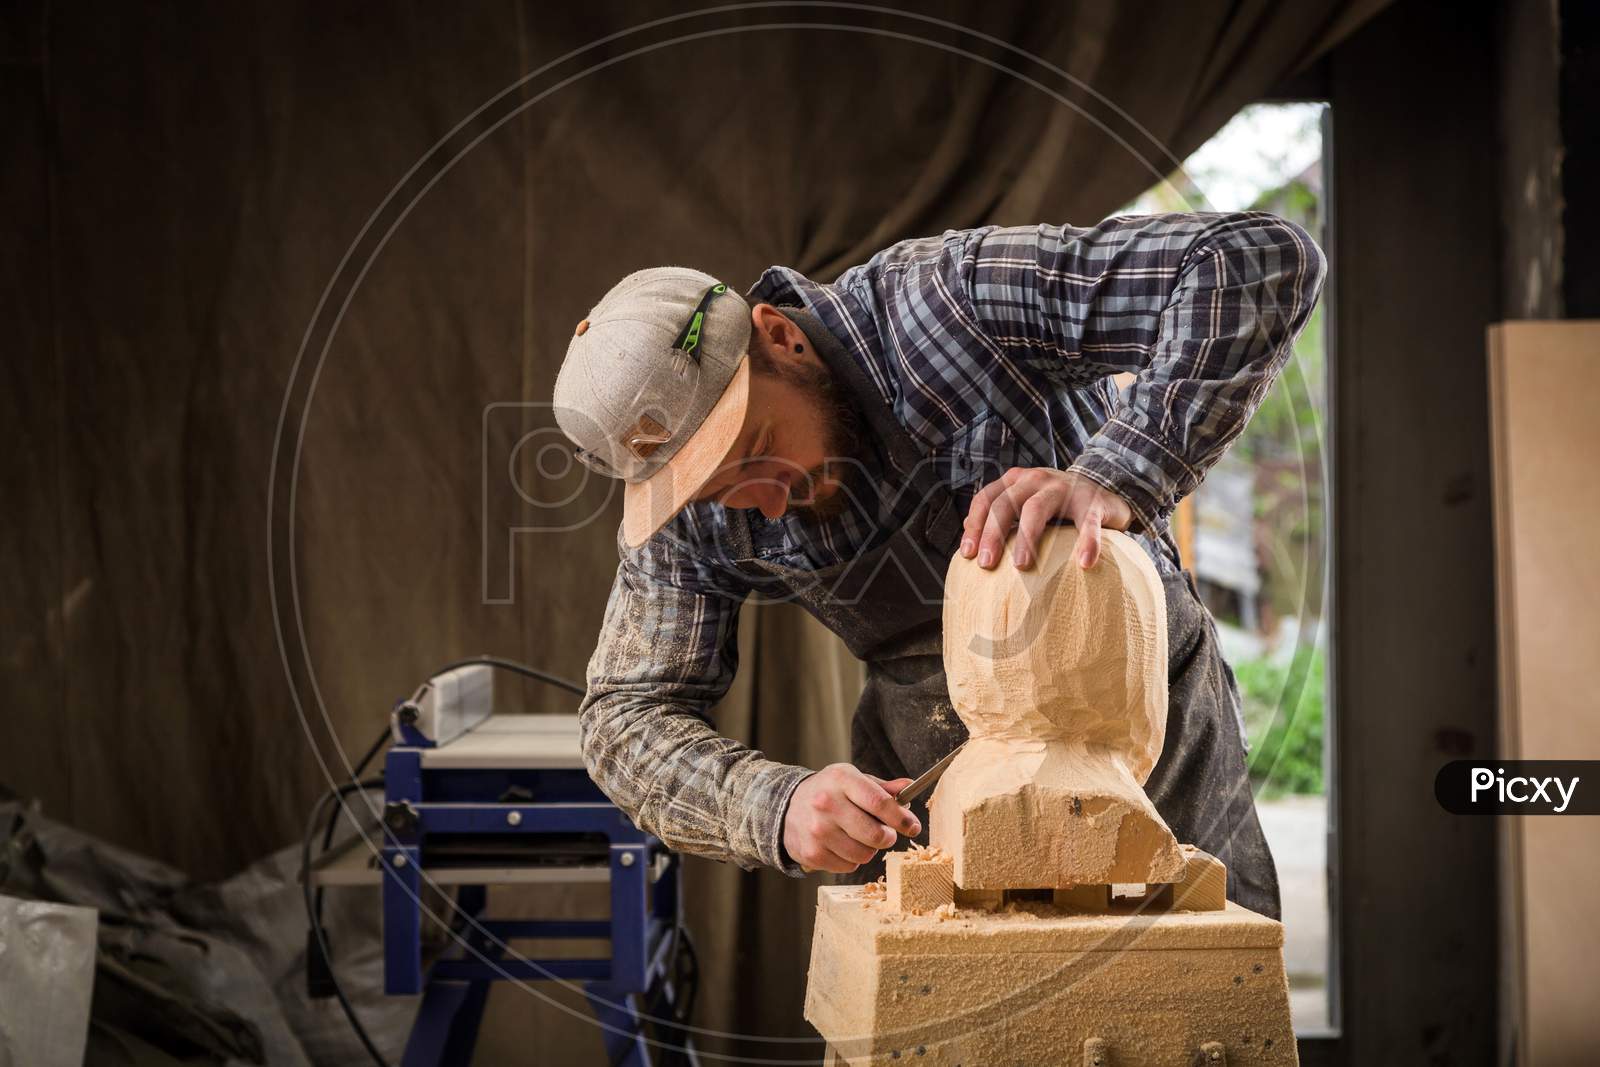 Close Up Of A Carpenter, Builder In Work Clothes Saw To Cut Out Sculpture From Wooden A Man'S Head  In The Workshop, Around A Lot Of Tools,Wooden,Furniture For Work